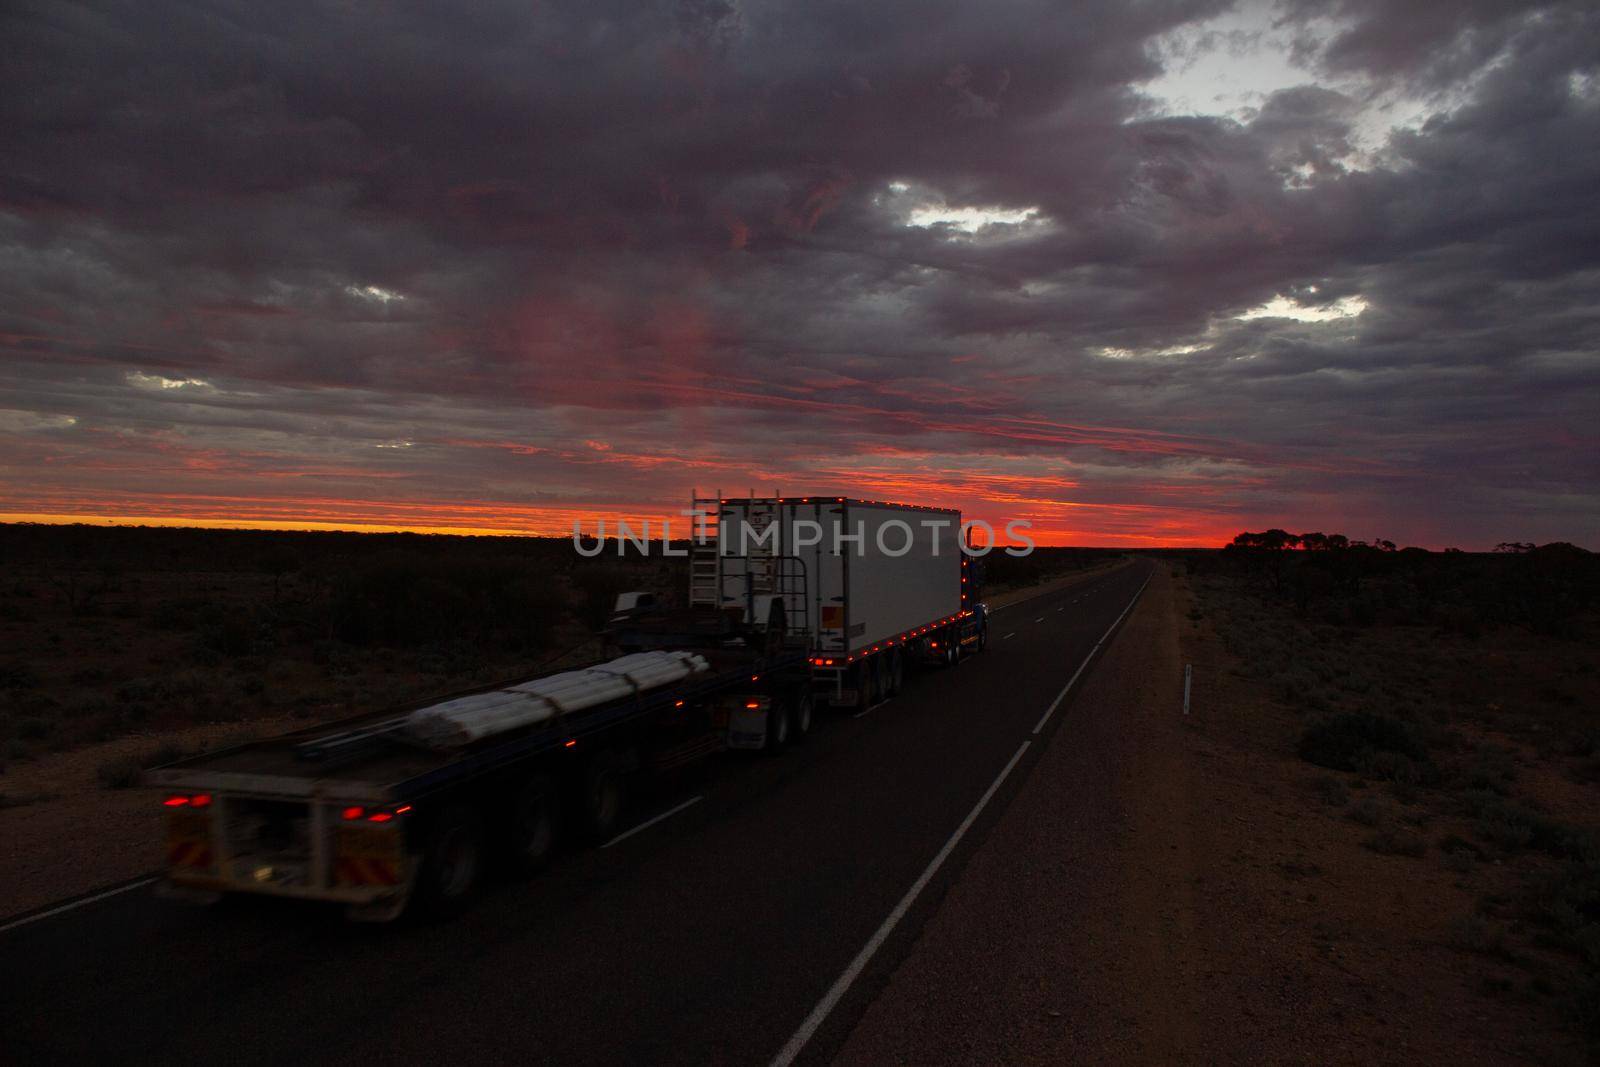 Roadtrain on stuart highway at night. A roadtrain use in remote areas of Australia to move freight efficiently, NORTHERN TERRITORY,Australia. by bettercallcurry